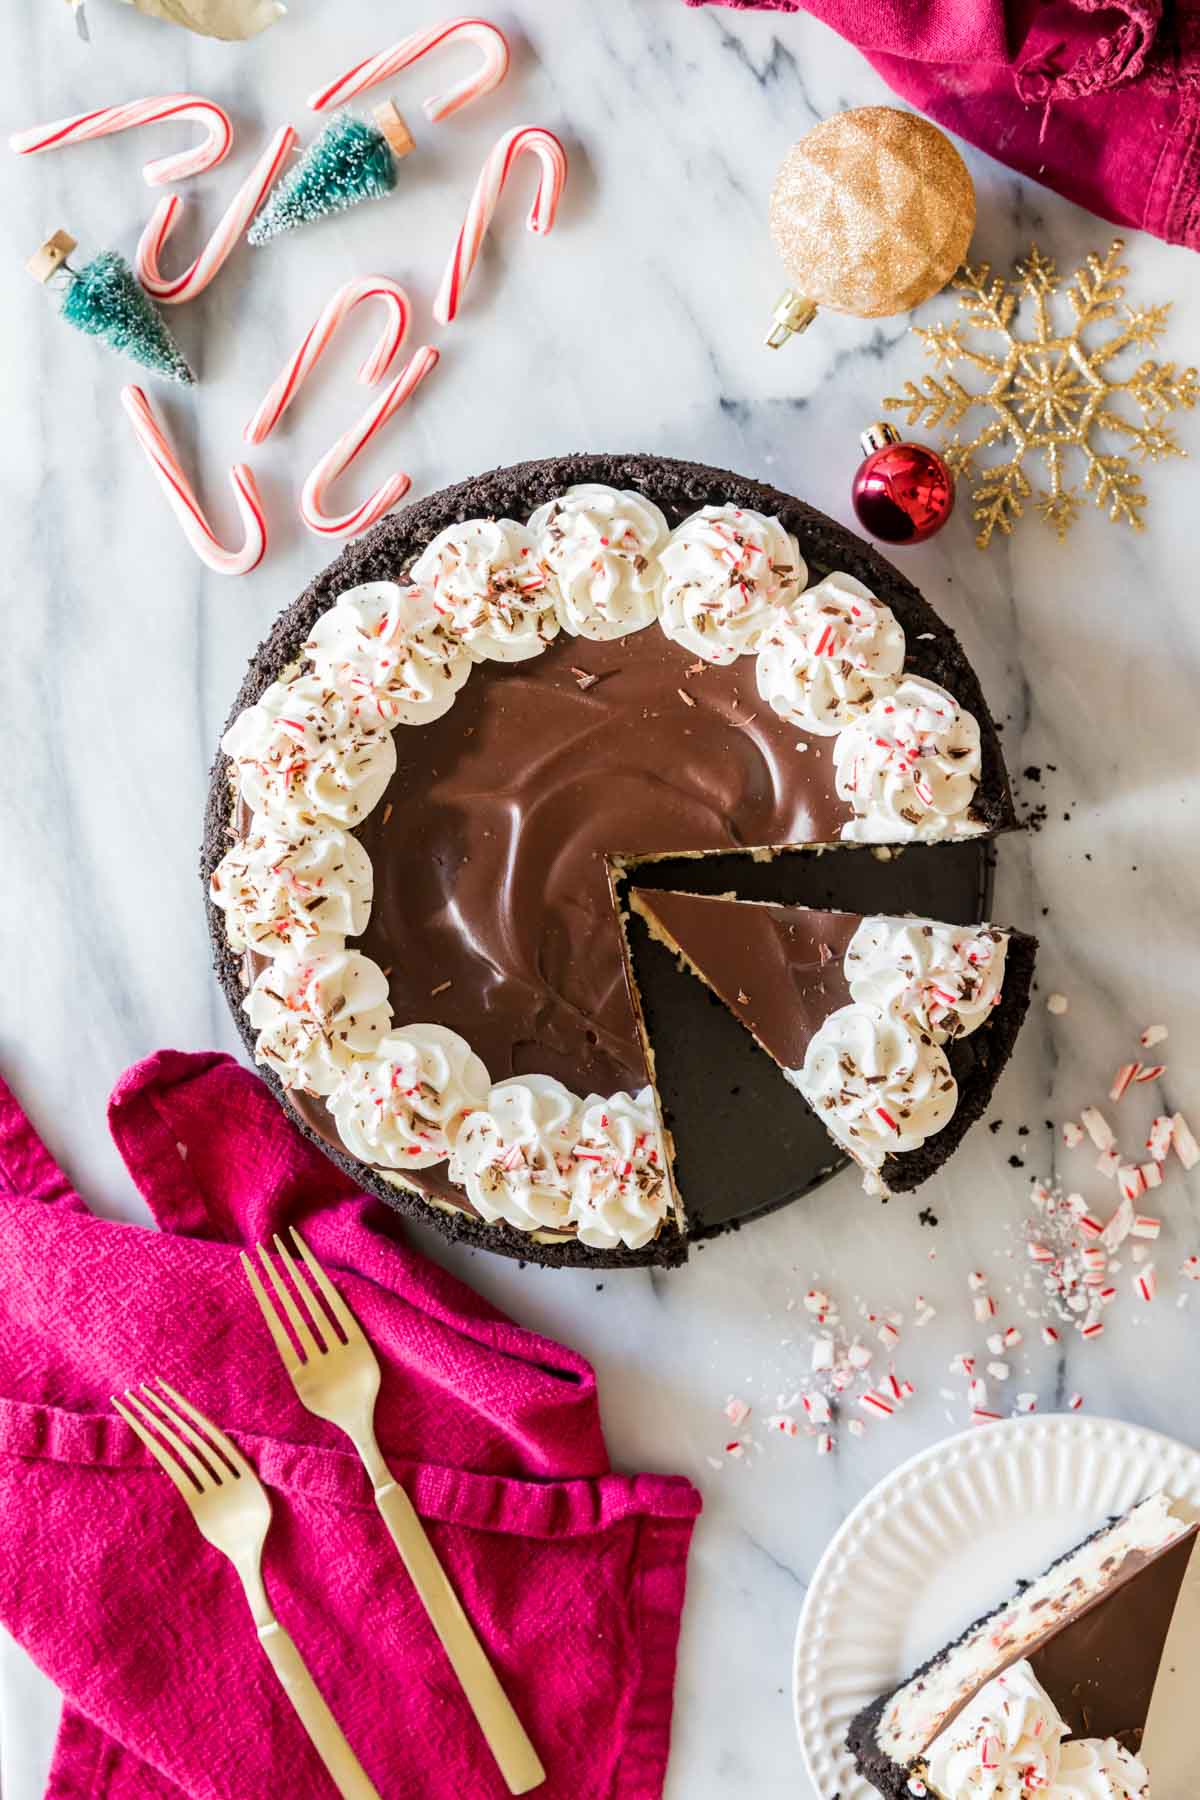 Overhead view of a cheesecake topped with chocolate ganache, whipped cream, and crushed peppermint candy.